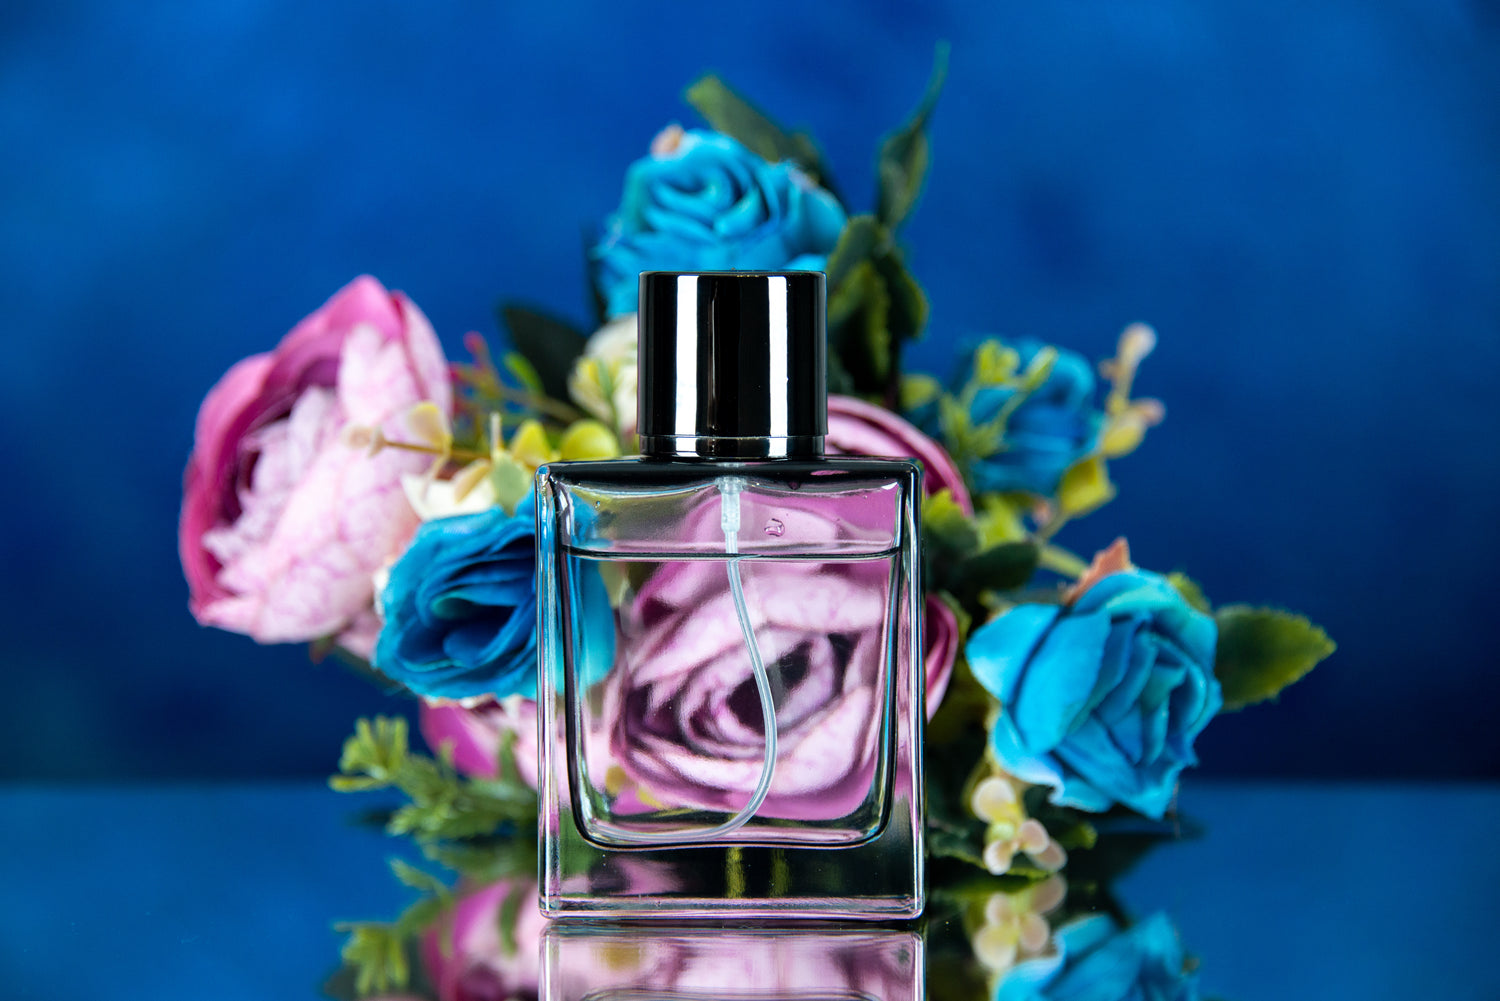 Floral Scents